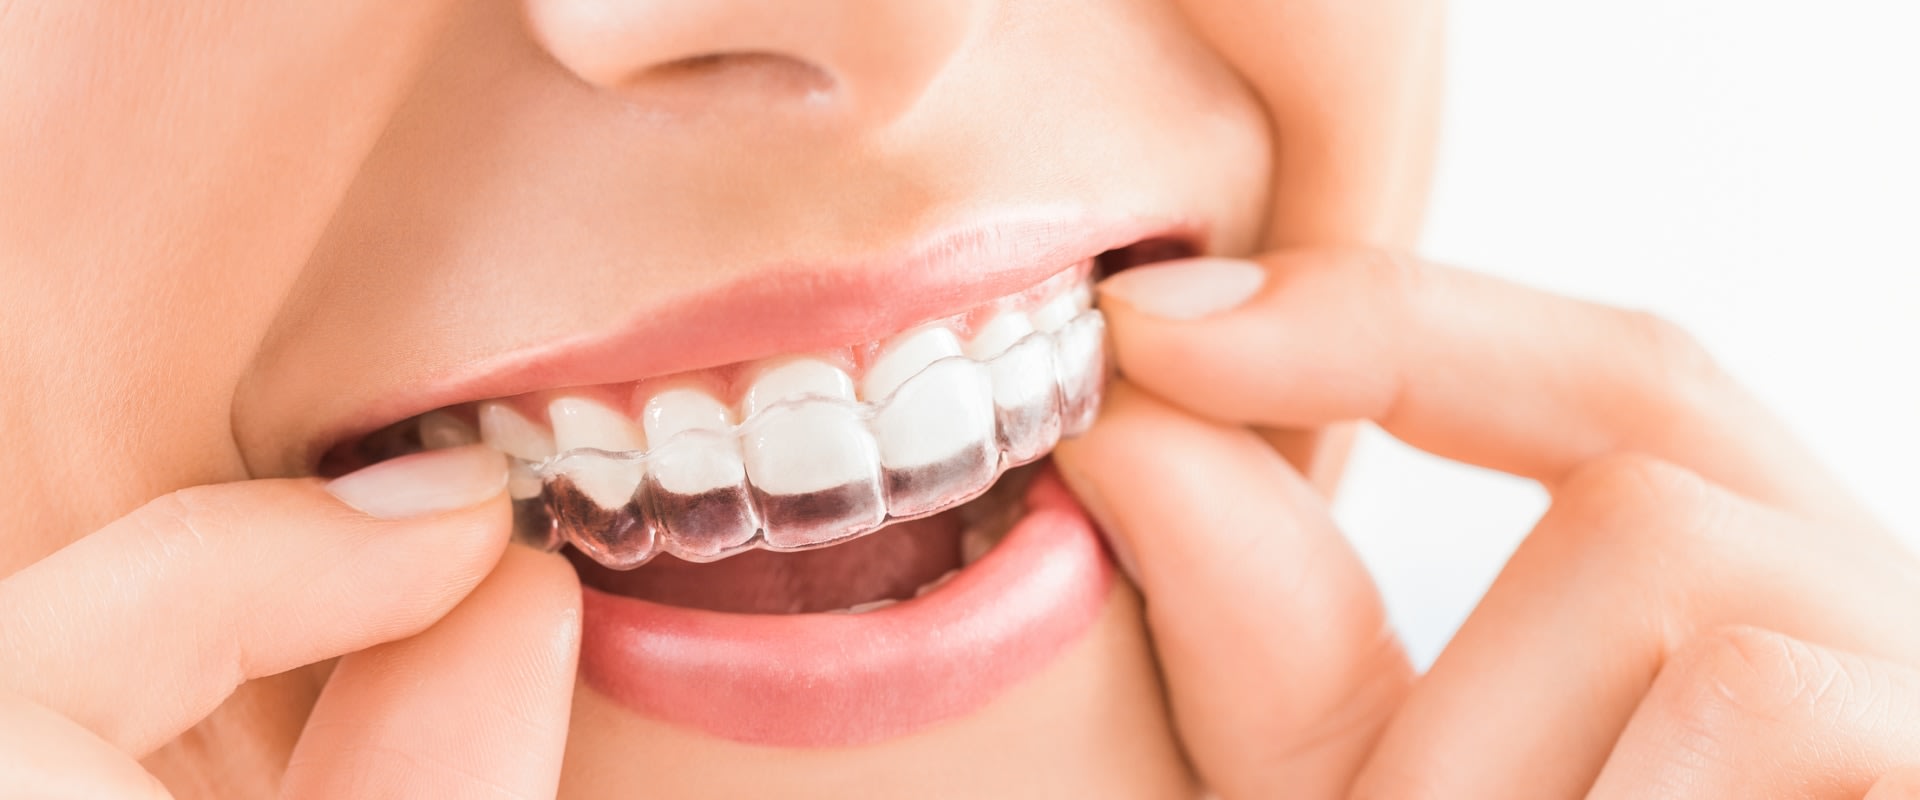 Do Clear Aligners Work as Well as Braces?